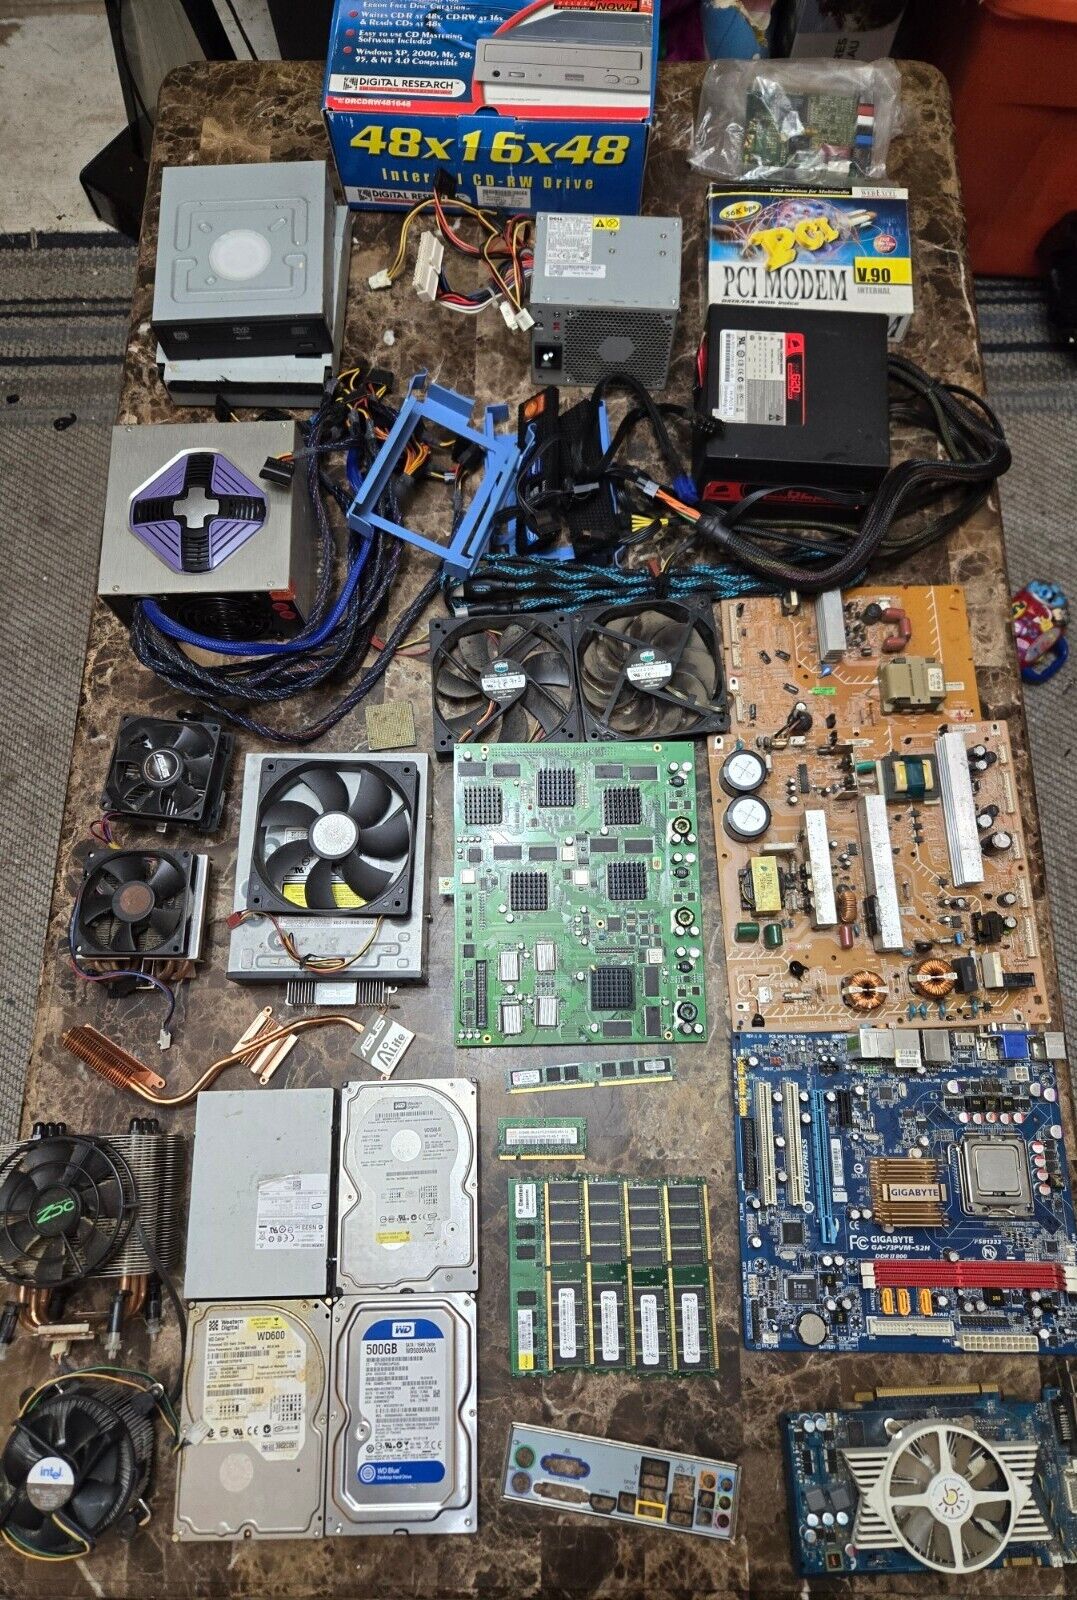 JUNK DRAWER COMPUTER PARTS LOT CIRCUT BOARDS MOTHERBOARDS HARD DISC DRIVES AS IS